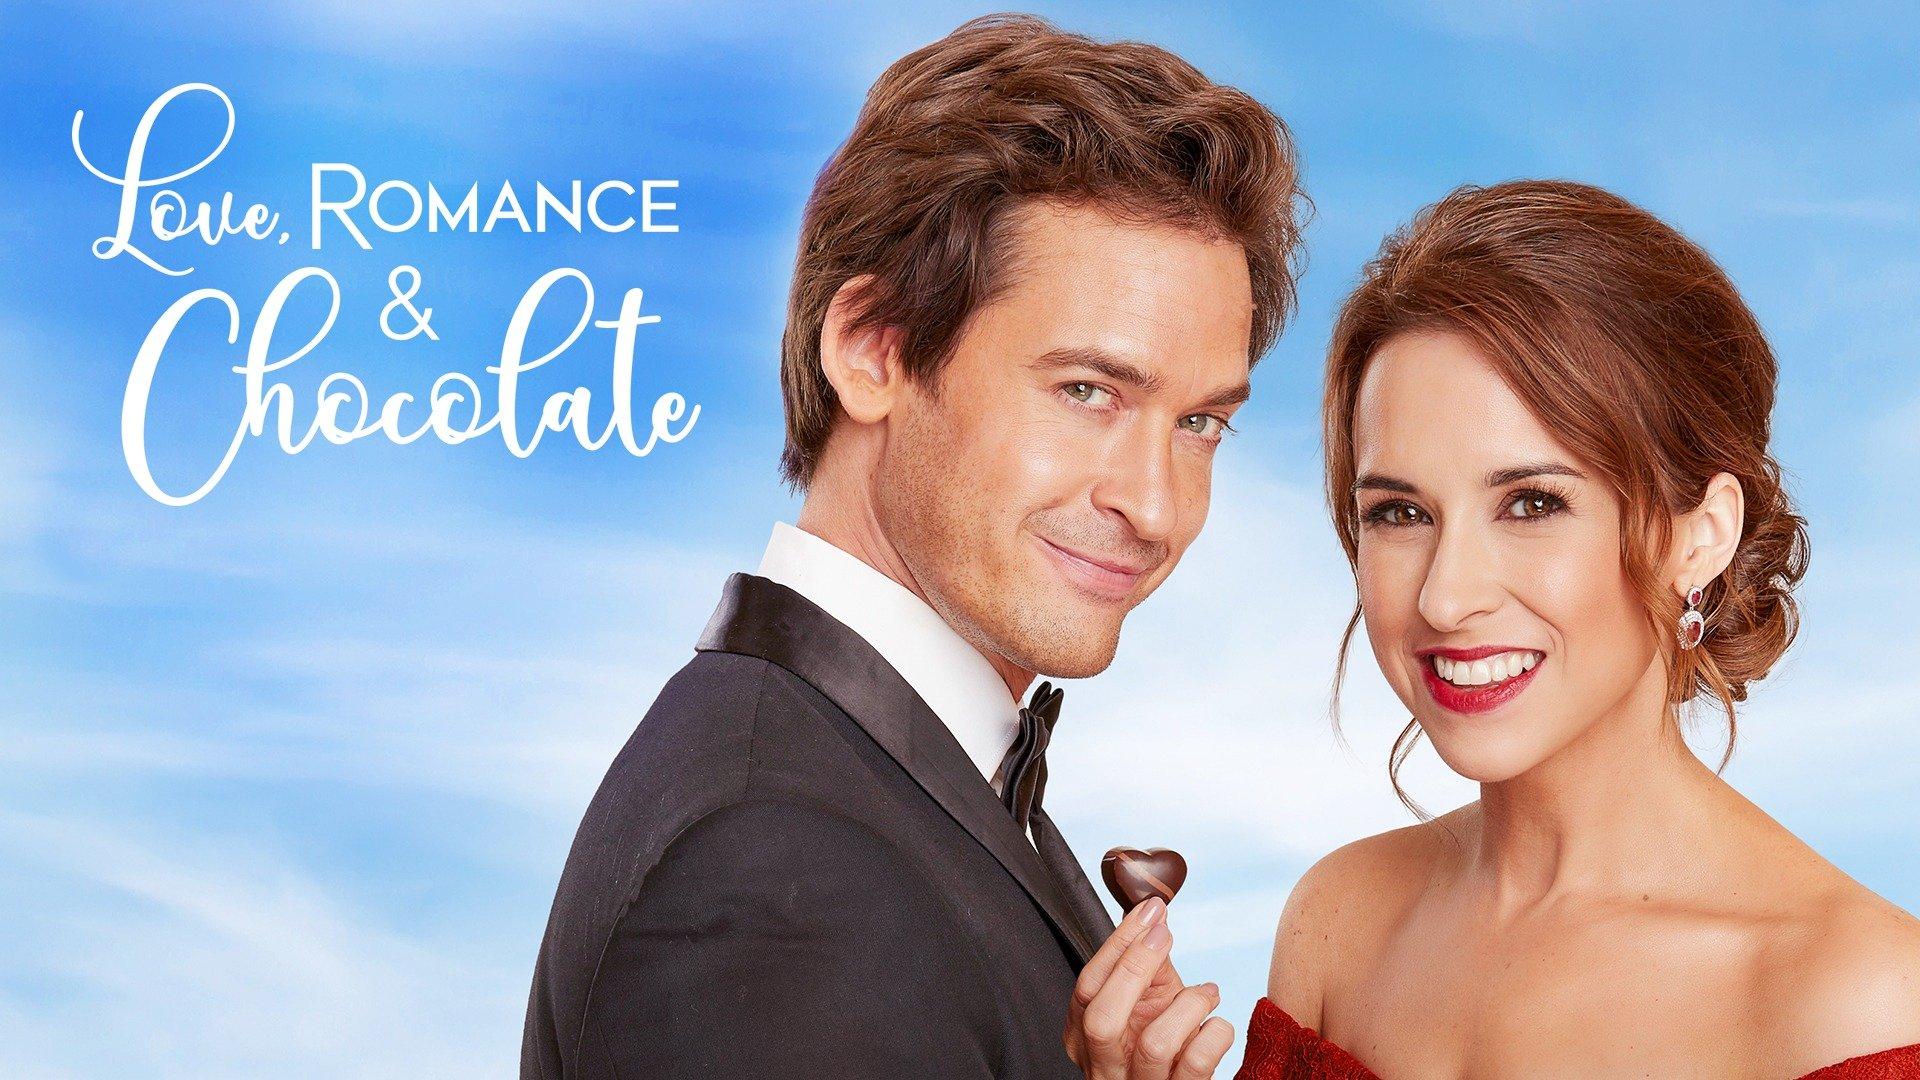 Romance with Chocolate - Hidden Items download the last version for apple